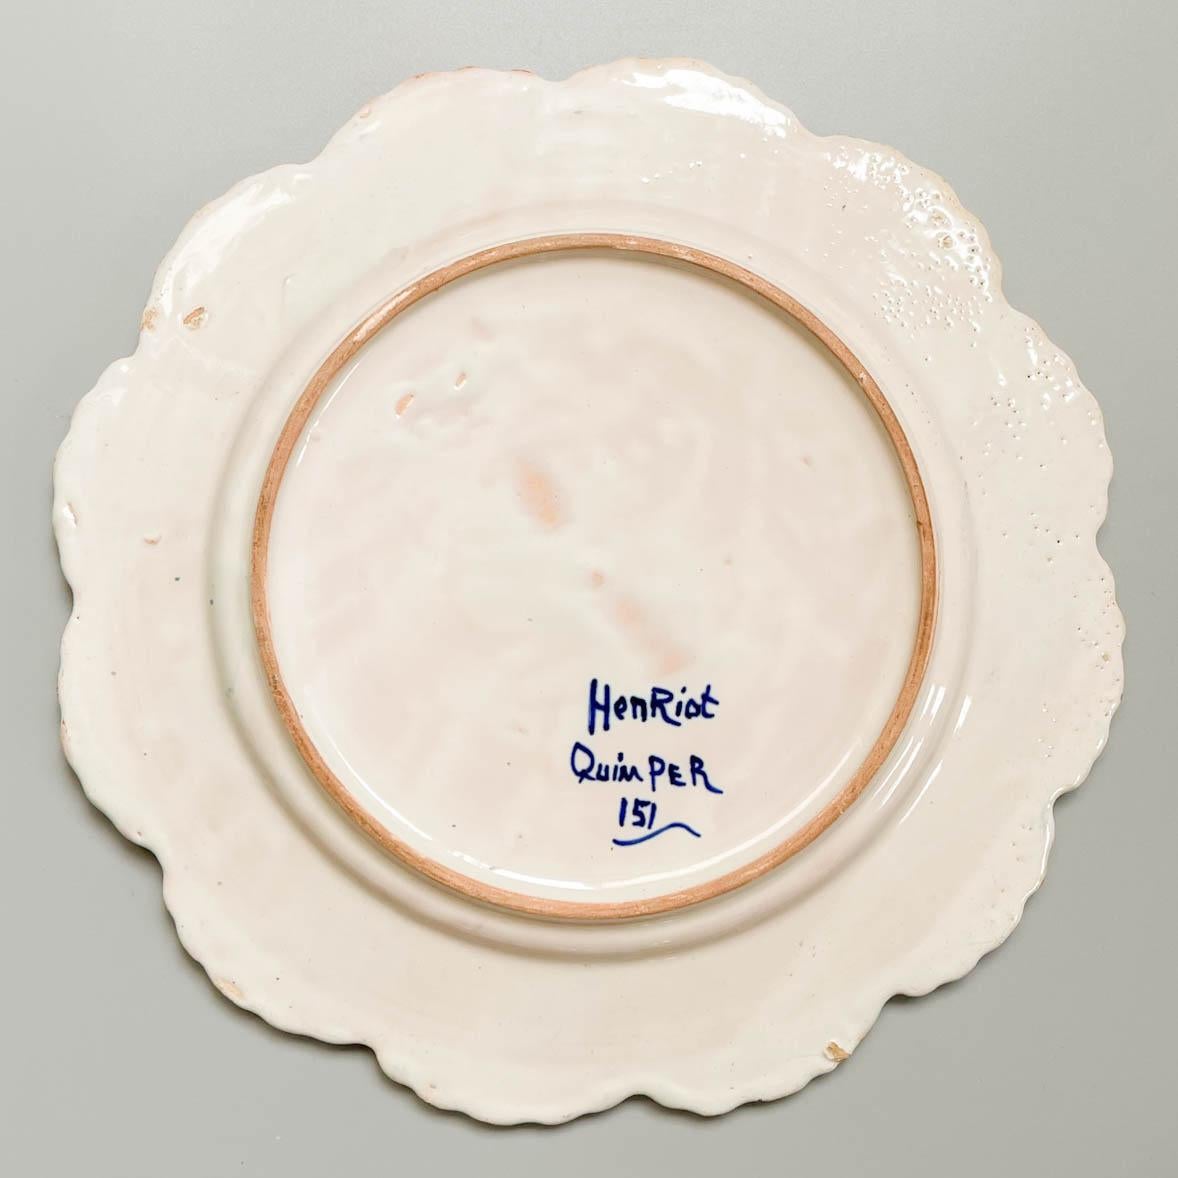 French Henriot Quimper Faience Plate In Good Condition For Sale In Winter Park, FL